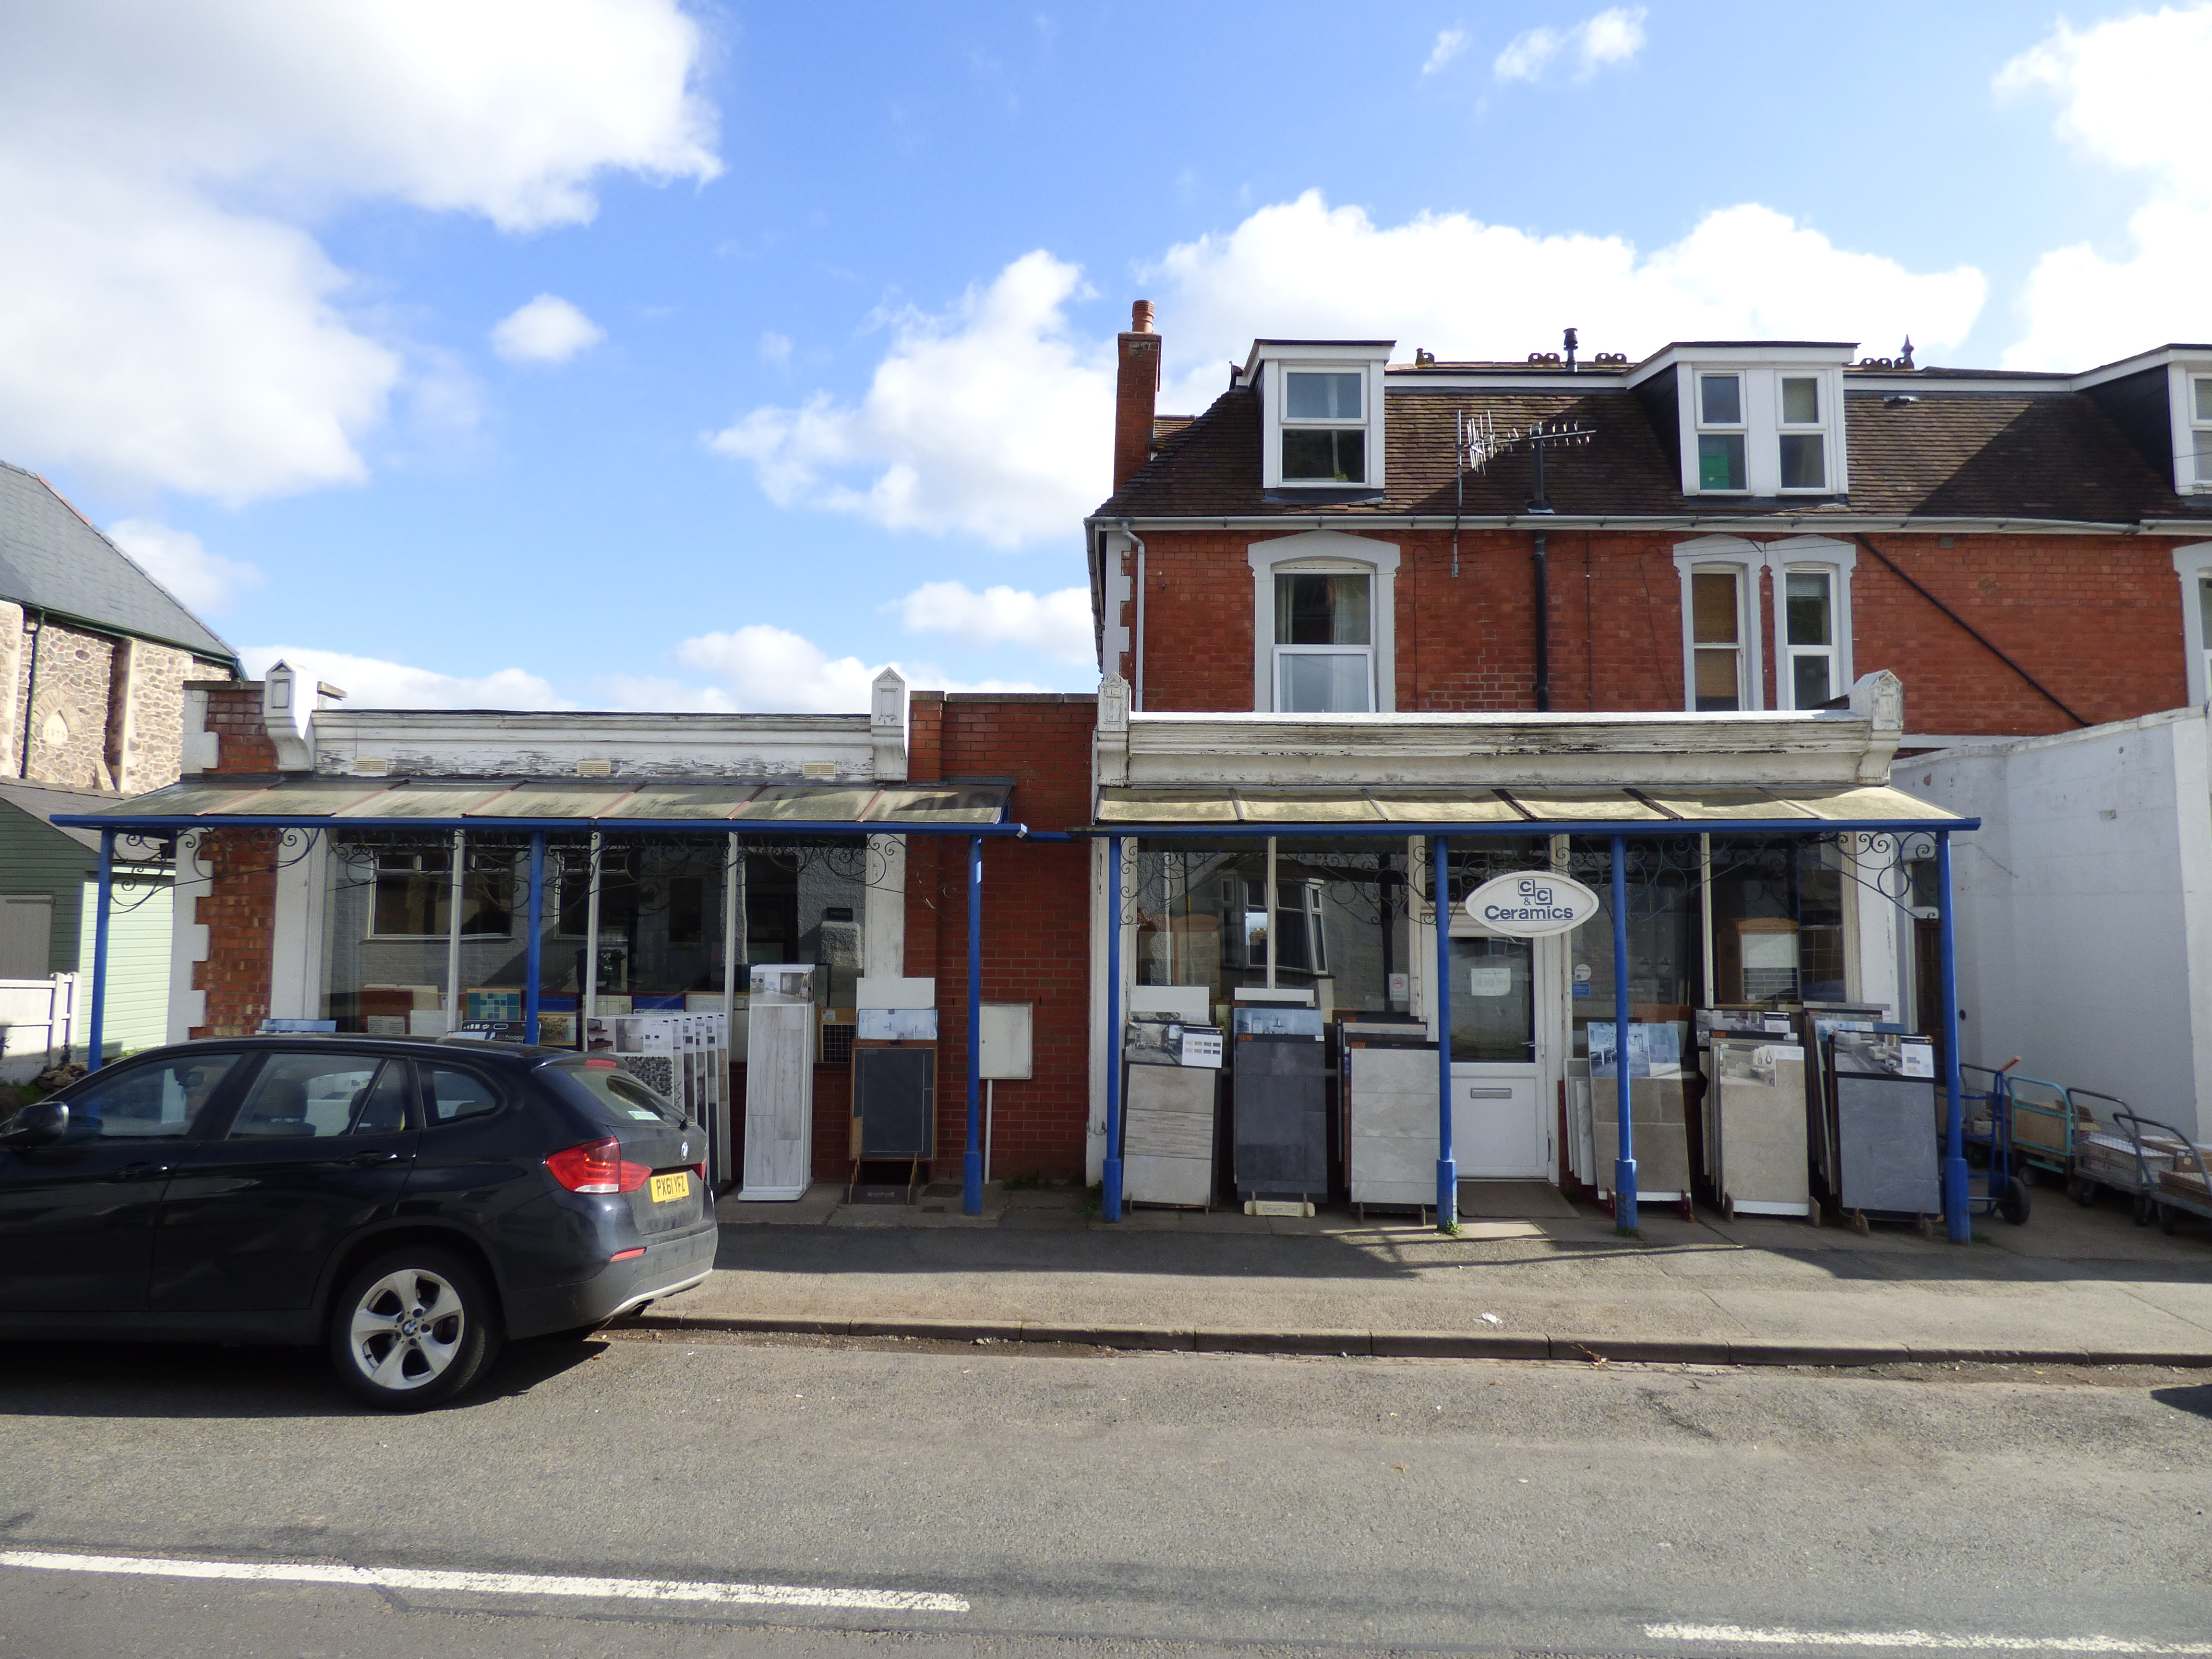 Flats A, B and C, 30 Cowleigh Road